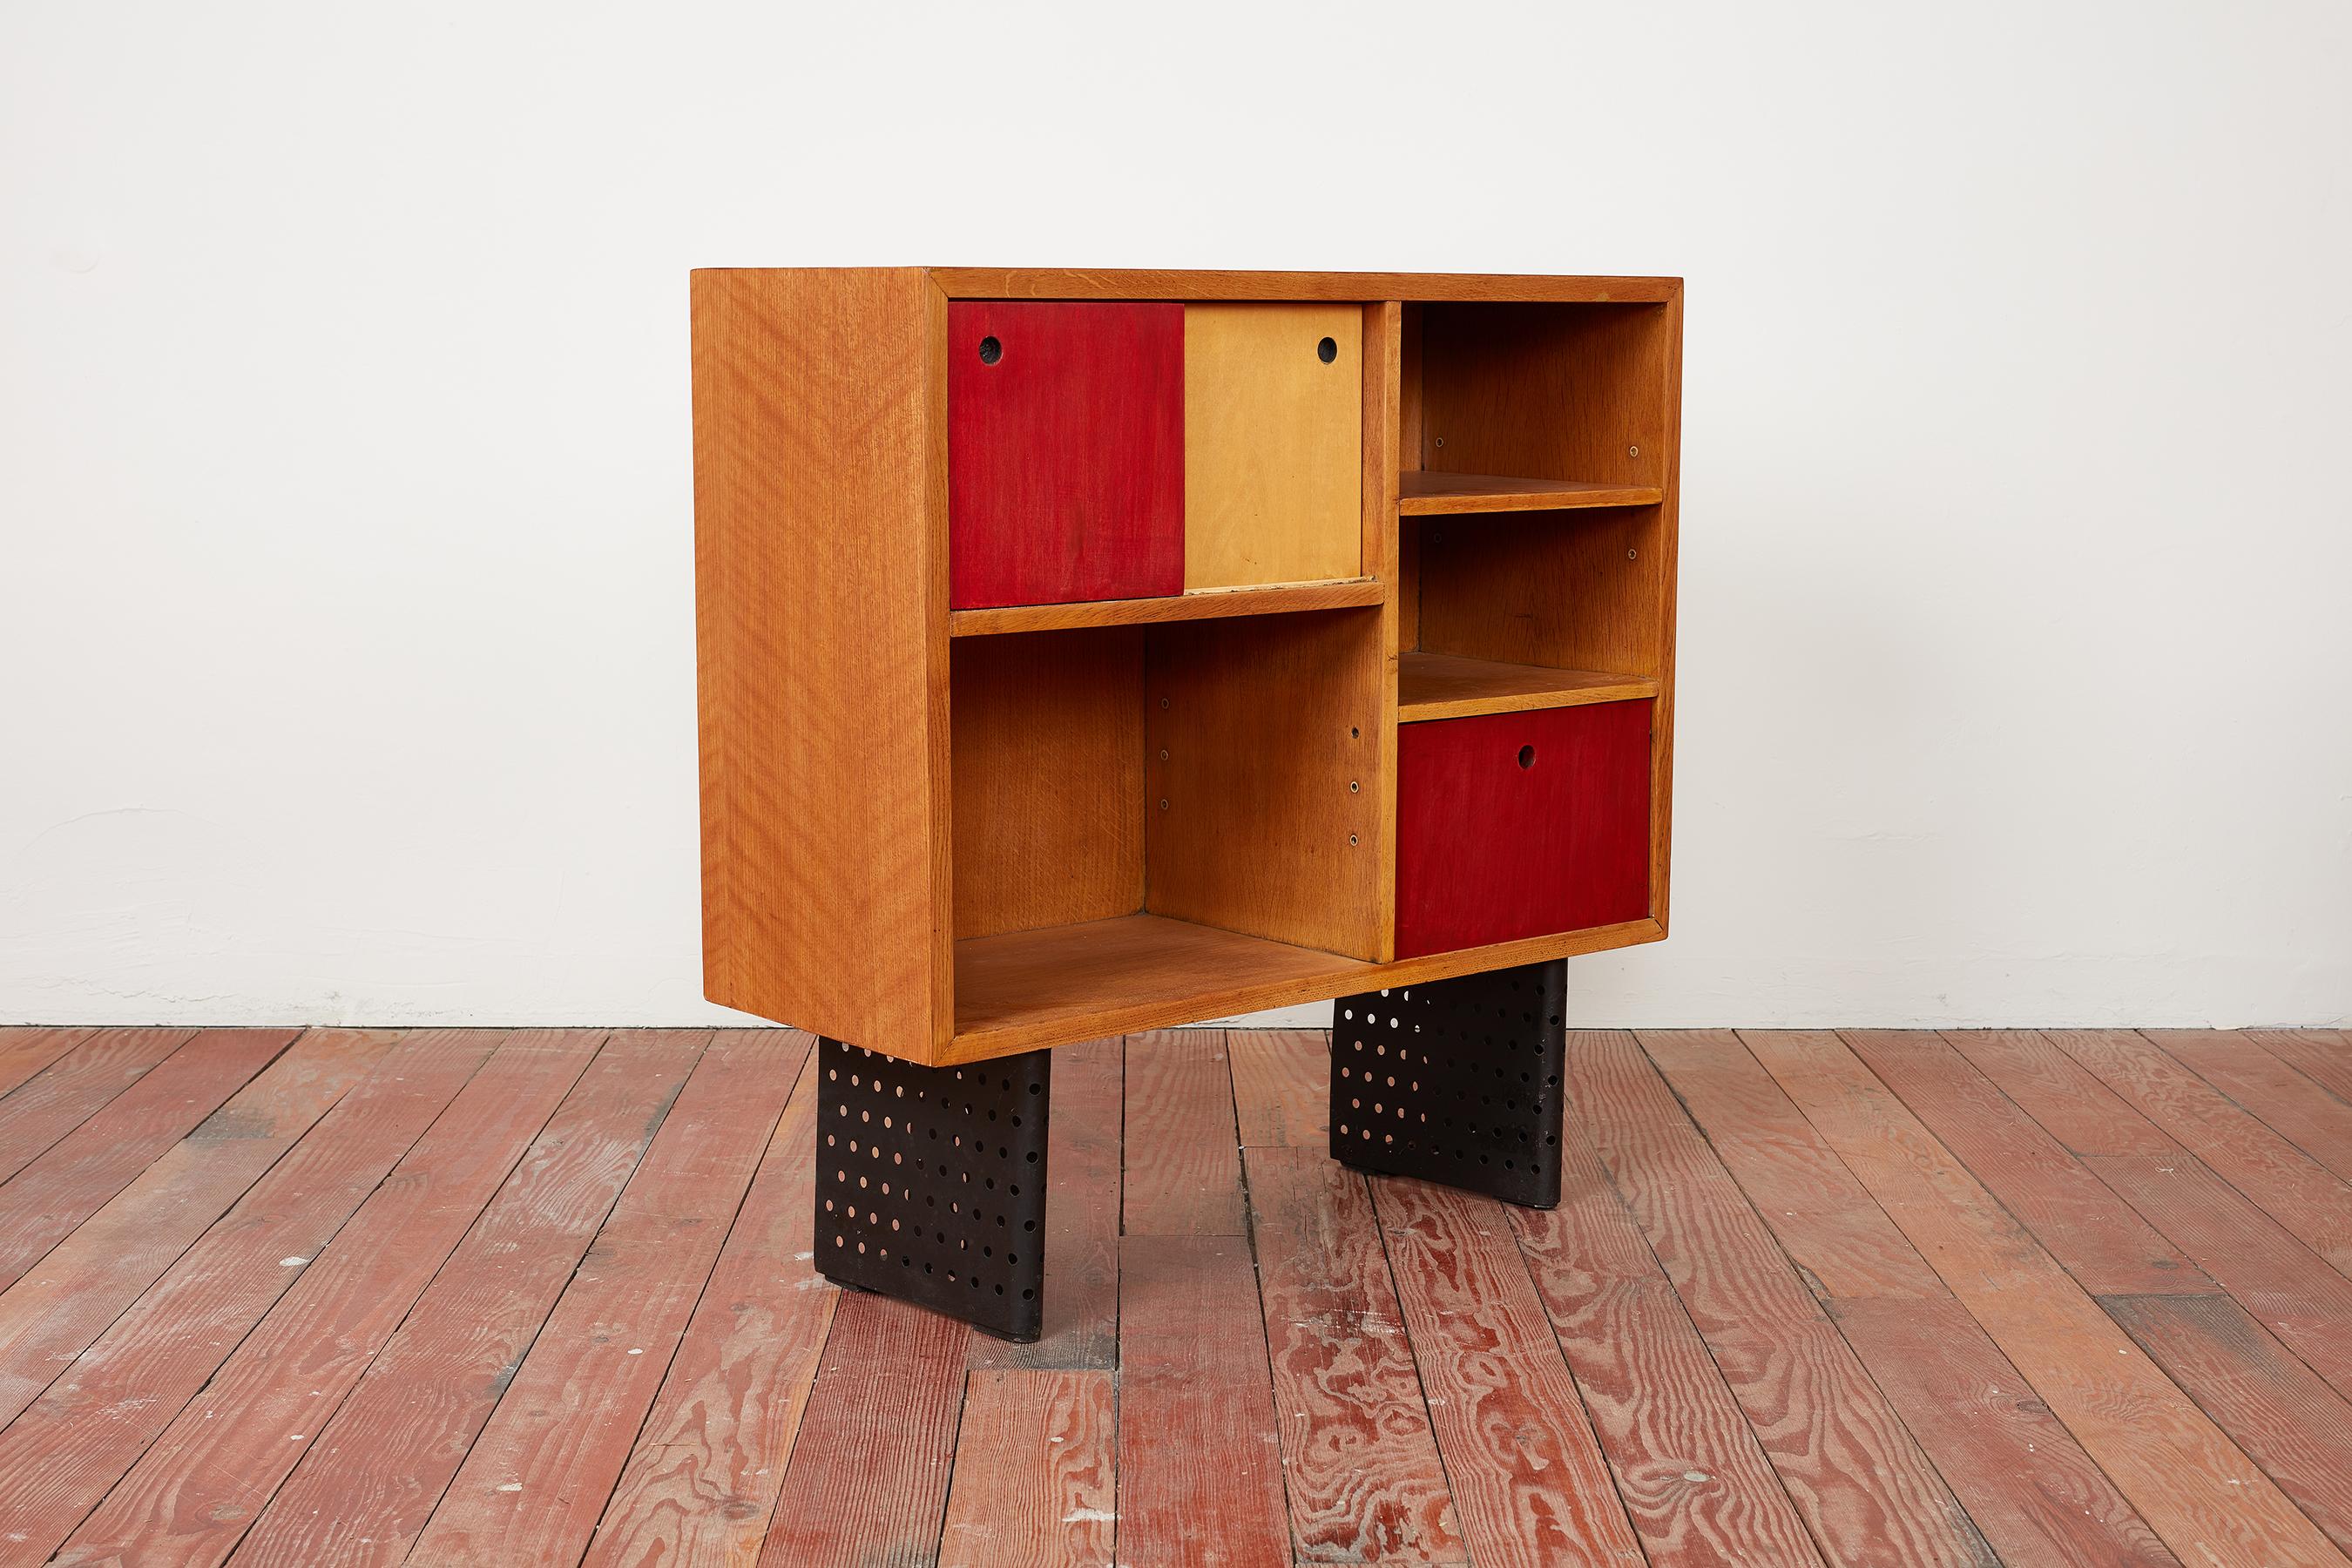 Rare Escande cabinet manufactured by Marcel Yvroud for Cité Universitaire, Antony, France circa 1954. Oak frames with sliding doors and open niche bookshelves Signature perforated black metal legs Professionally refinished and restored to original